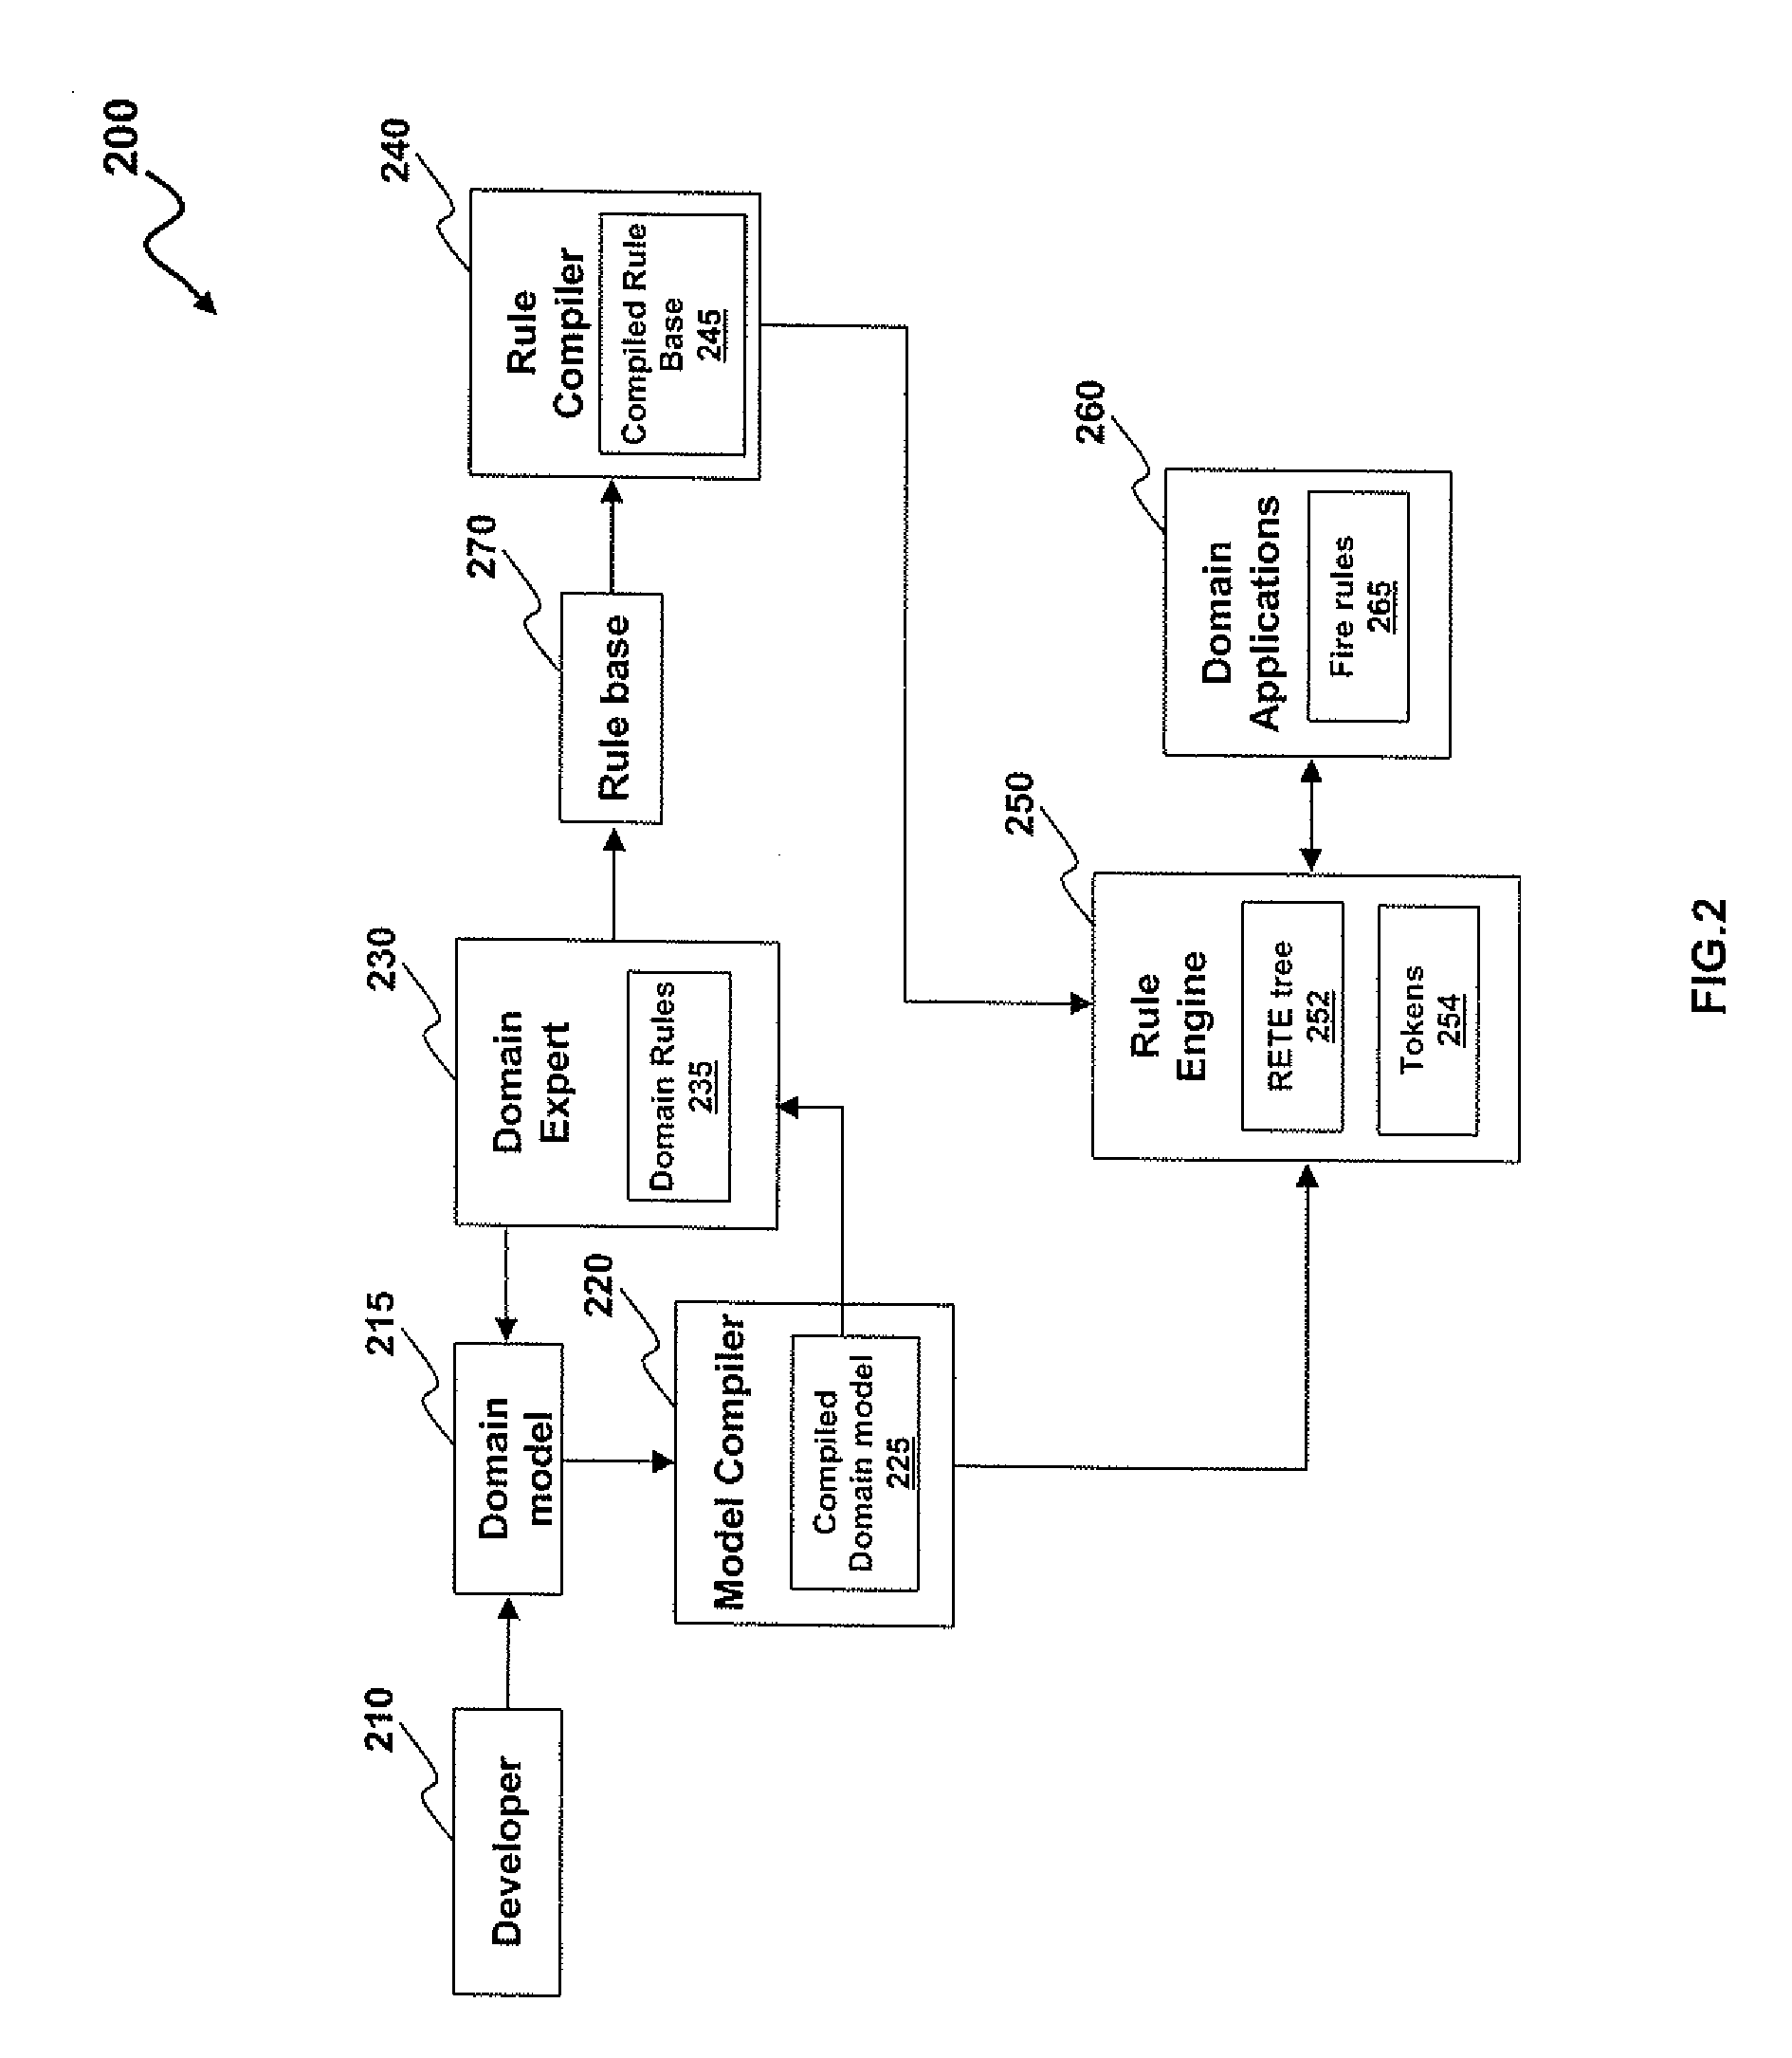 Object oriented rule-based system and method